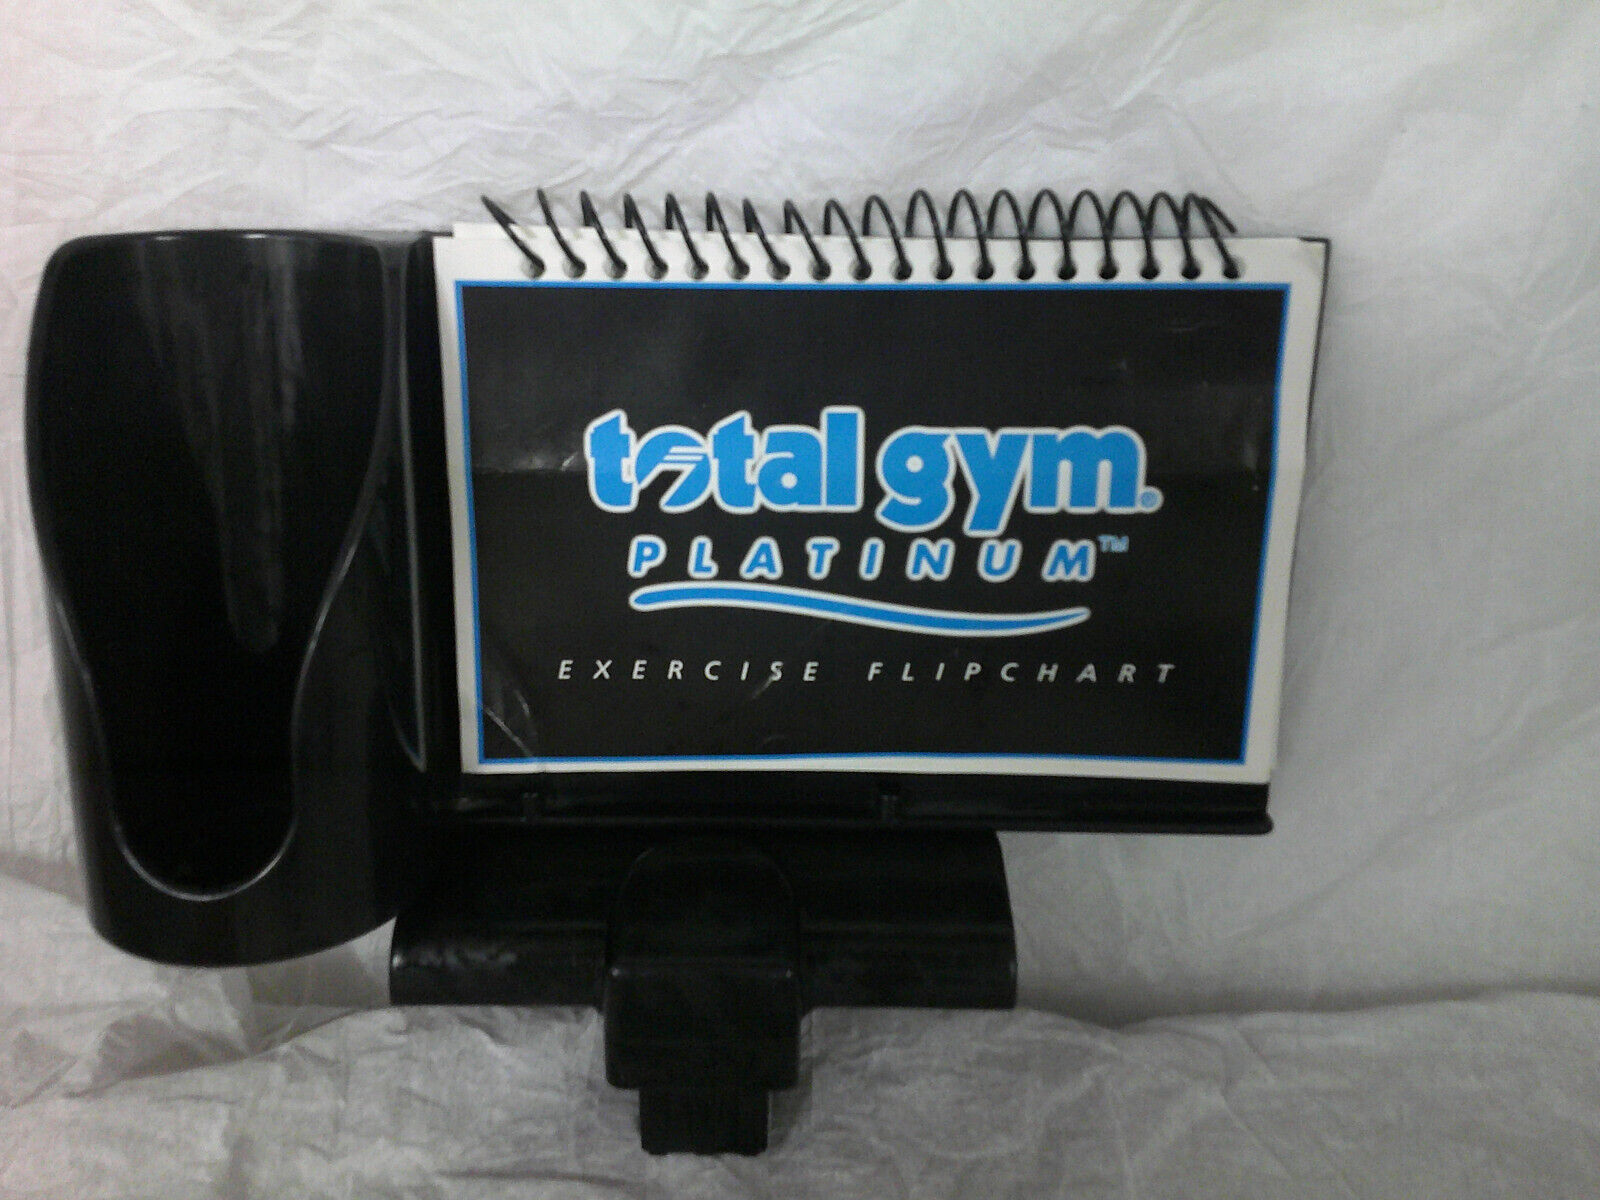 TOTAL GYM PLATINUM Exercise Flip Chart and Cup Holder